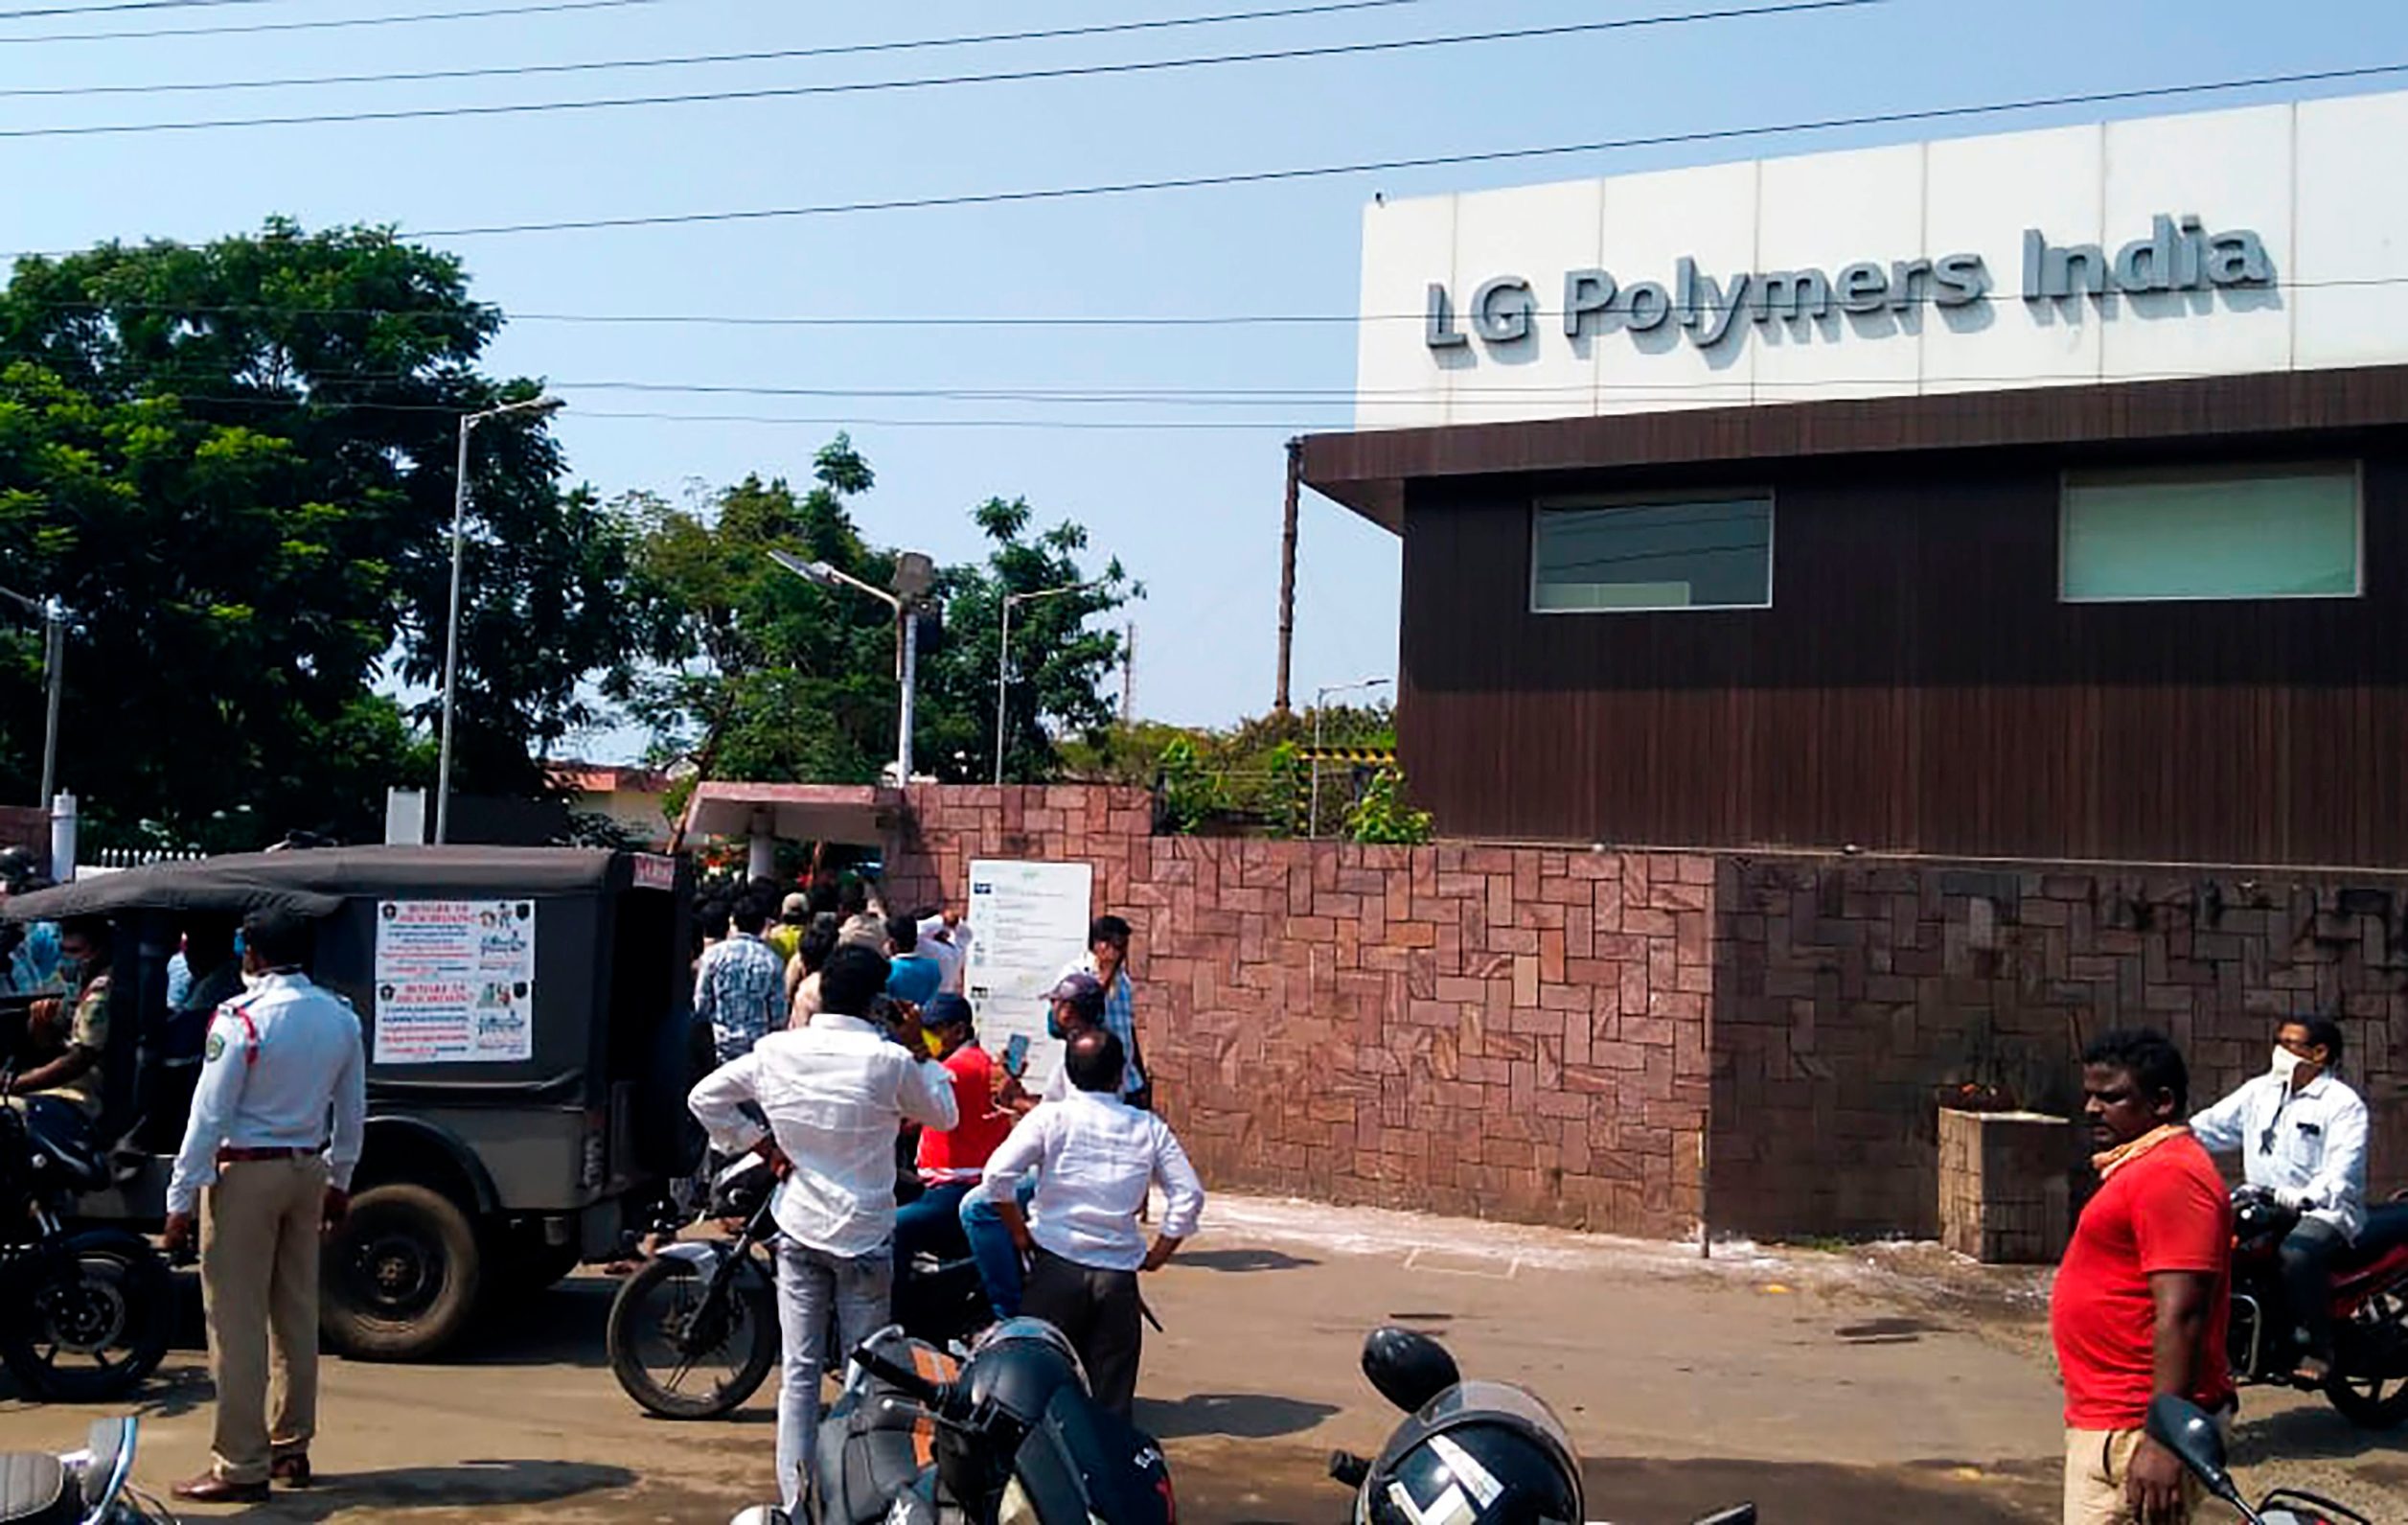 Policemen stand guard as people gather in front of a LG Polymers plant following a gas leak incident in Visakhapatnam on May 7, 2020. - At least five people have been killed and several hundred hospitalised after a gas leak at a chemicals plant on the east coast of India, police said on May 7. They said that the gas had leaked out of two 5,000-tonne tanks that had been unattended due to India's coronavirus lockdown in place since late March. (Photo by - / AFP)